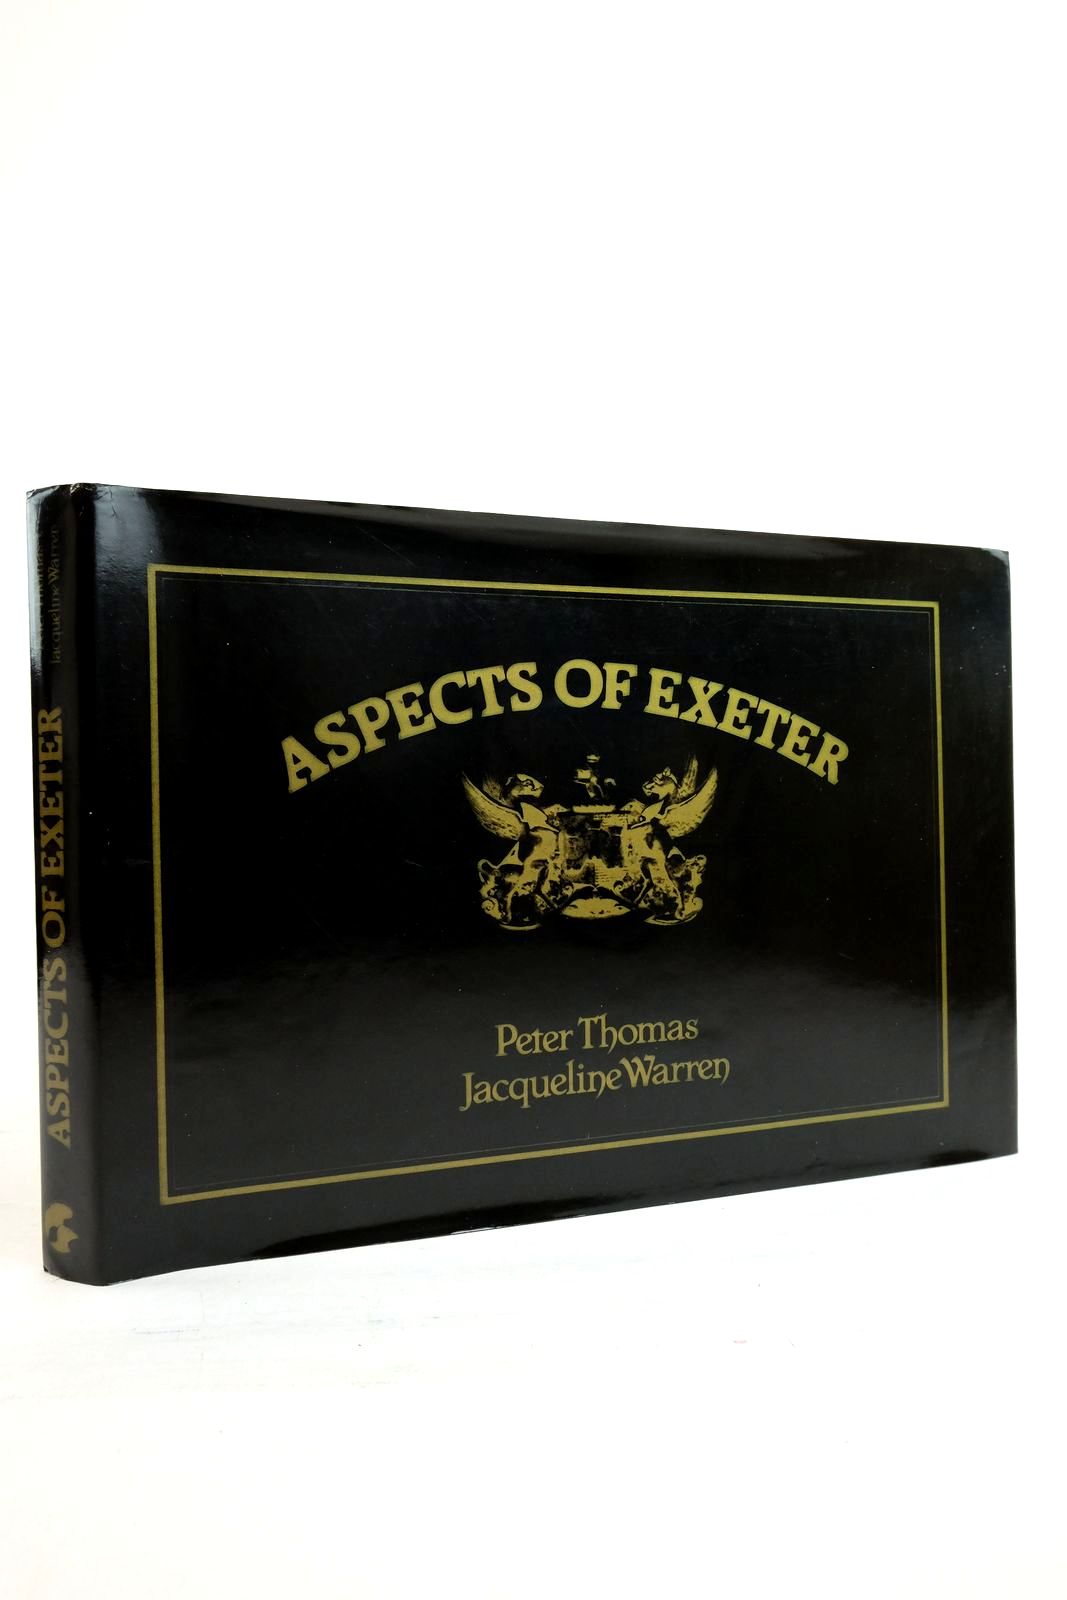 Photo of ASPECTS OF EXETER- Stock Number: 2134883